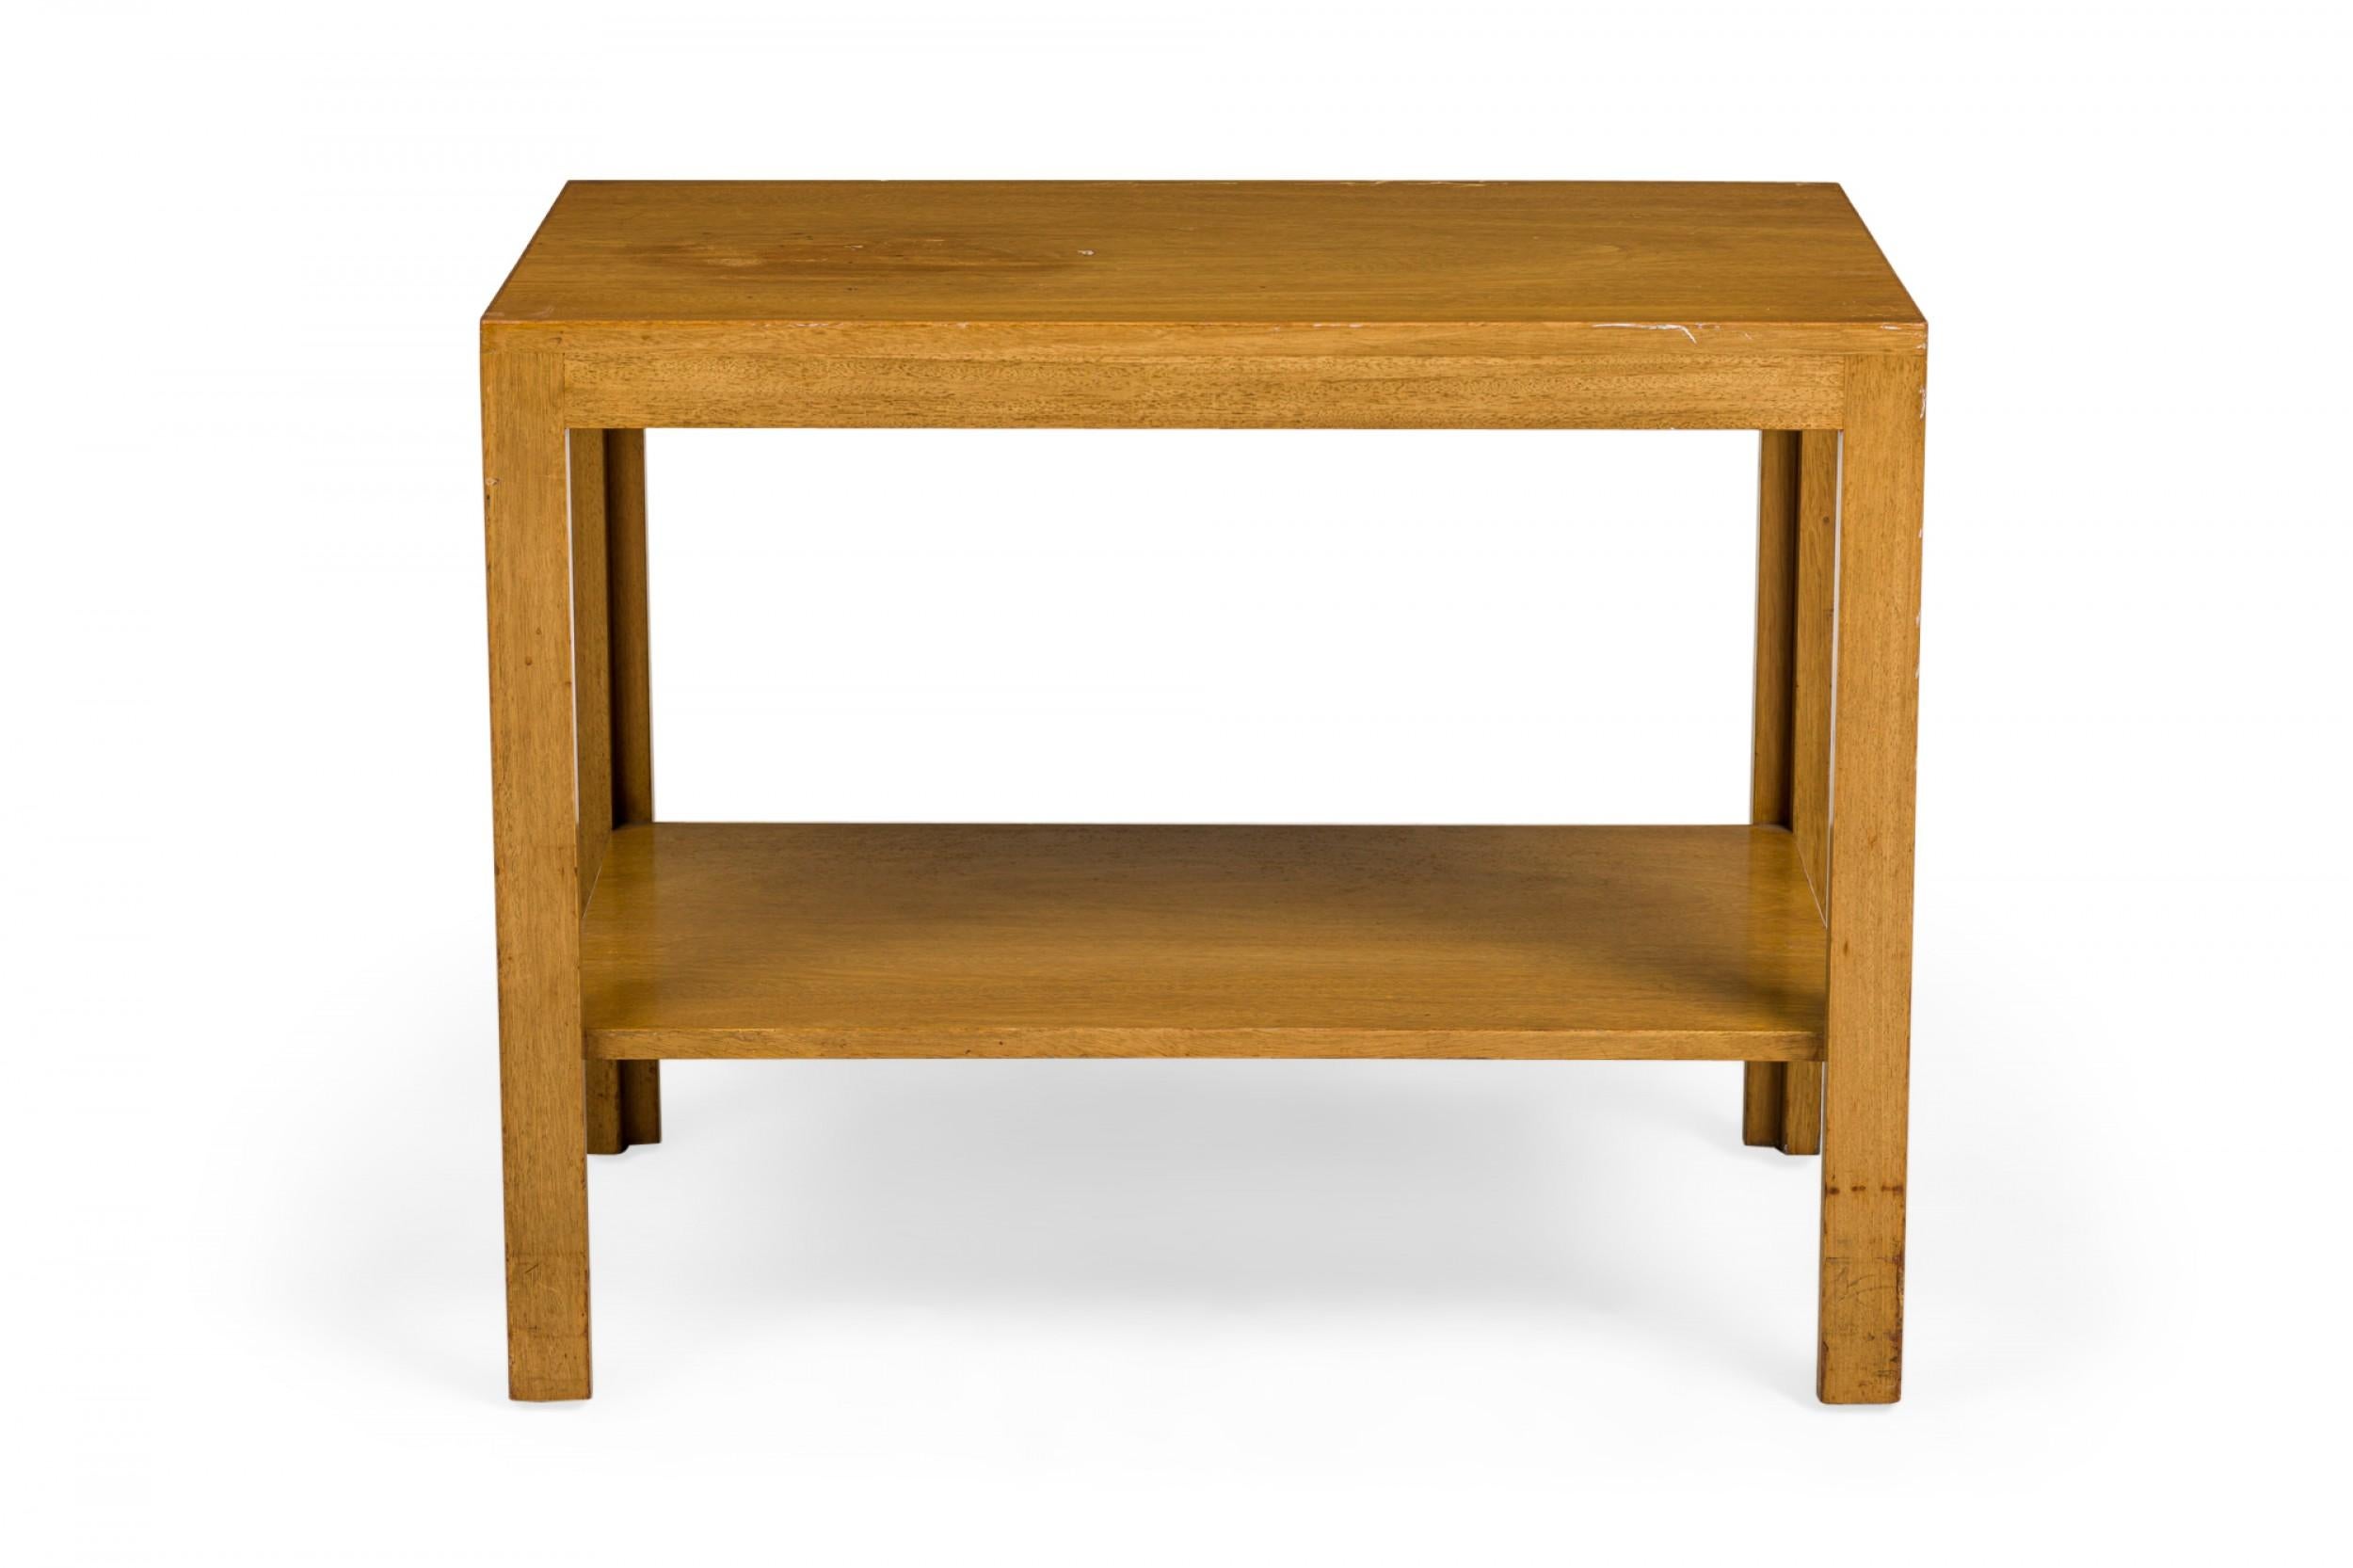 American Mid-Century Parsons-style end/side table with a wooden rectangular form with a lower stretcher shelf. (EDWARD WORMLEY FOR DUNBAR FURNITURE COMPANY).
 